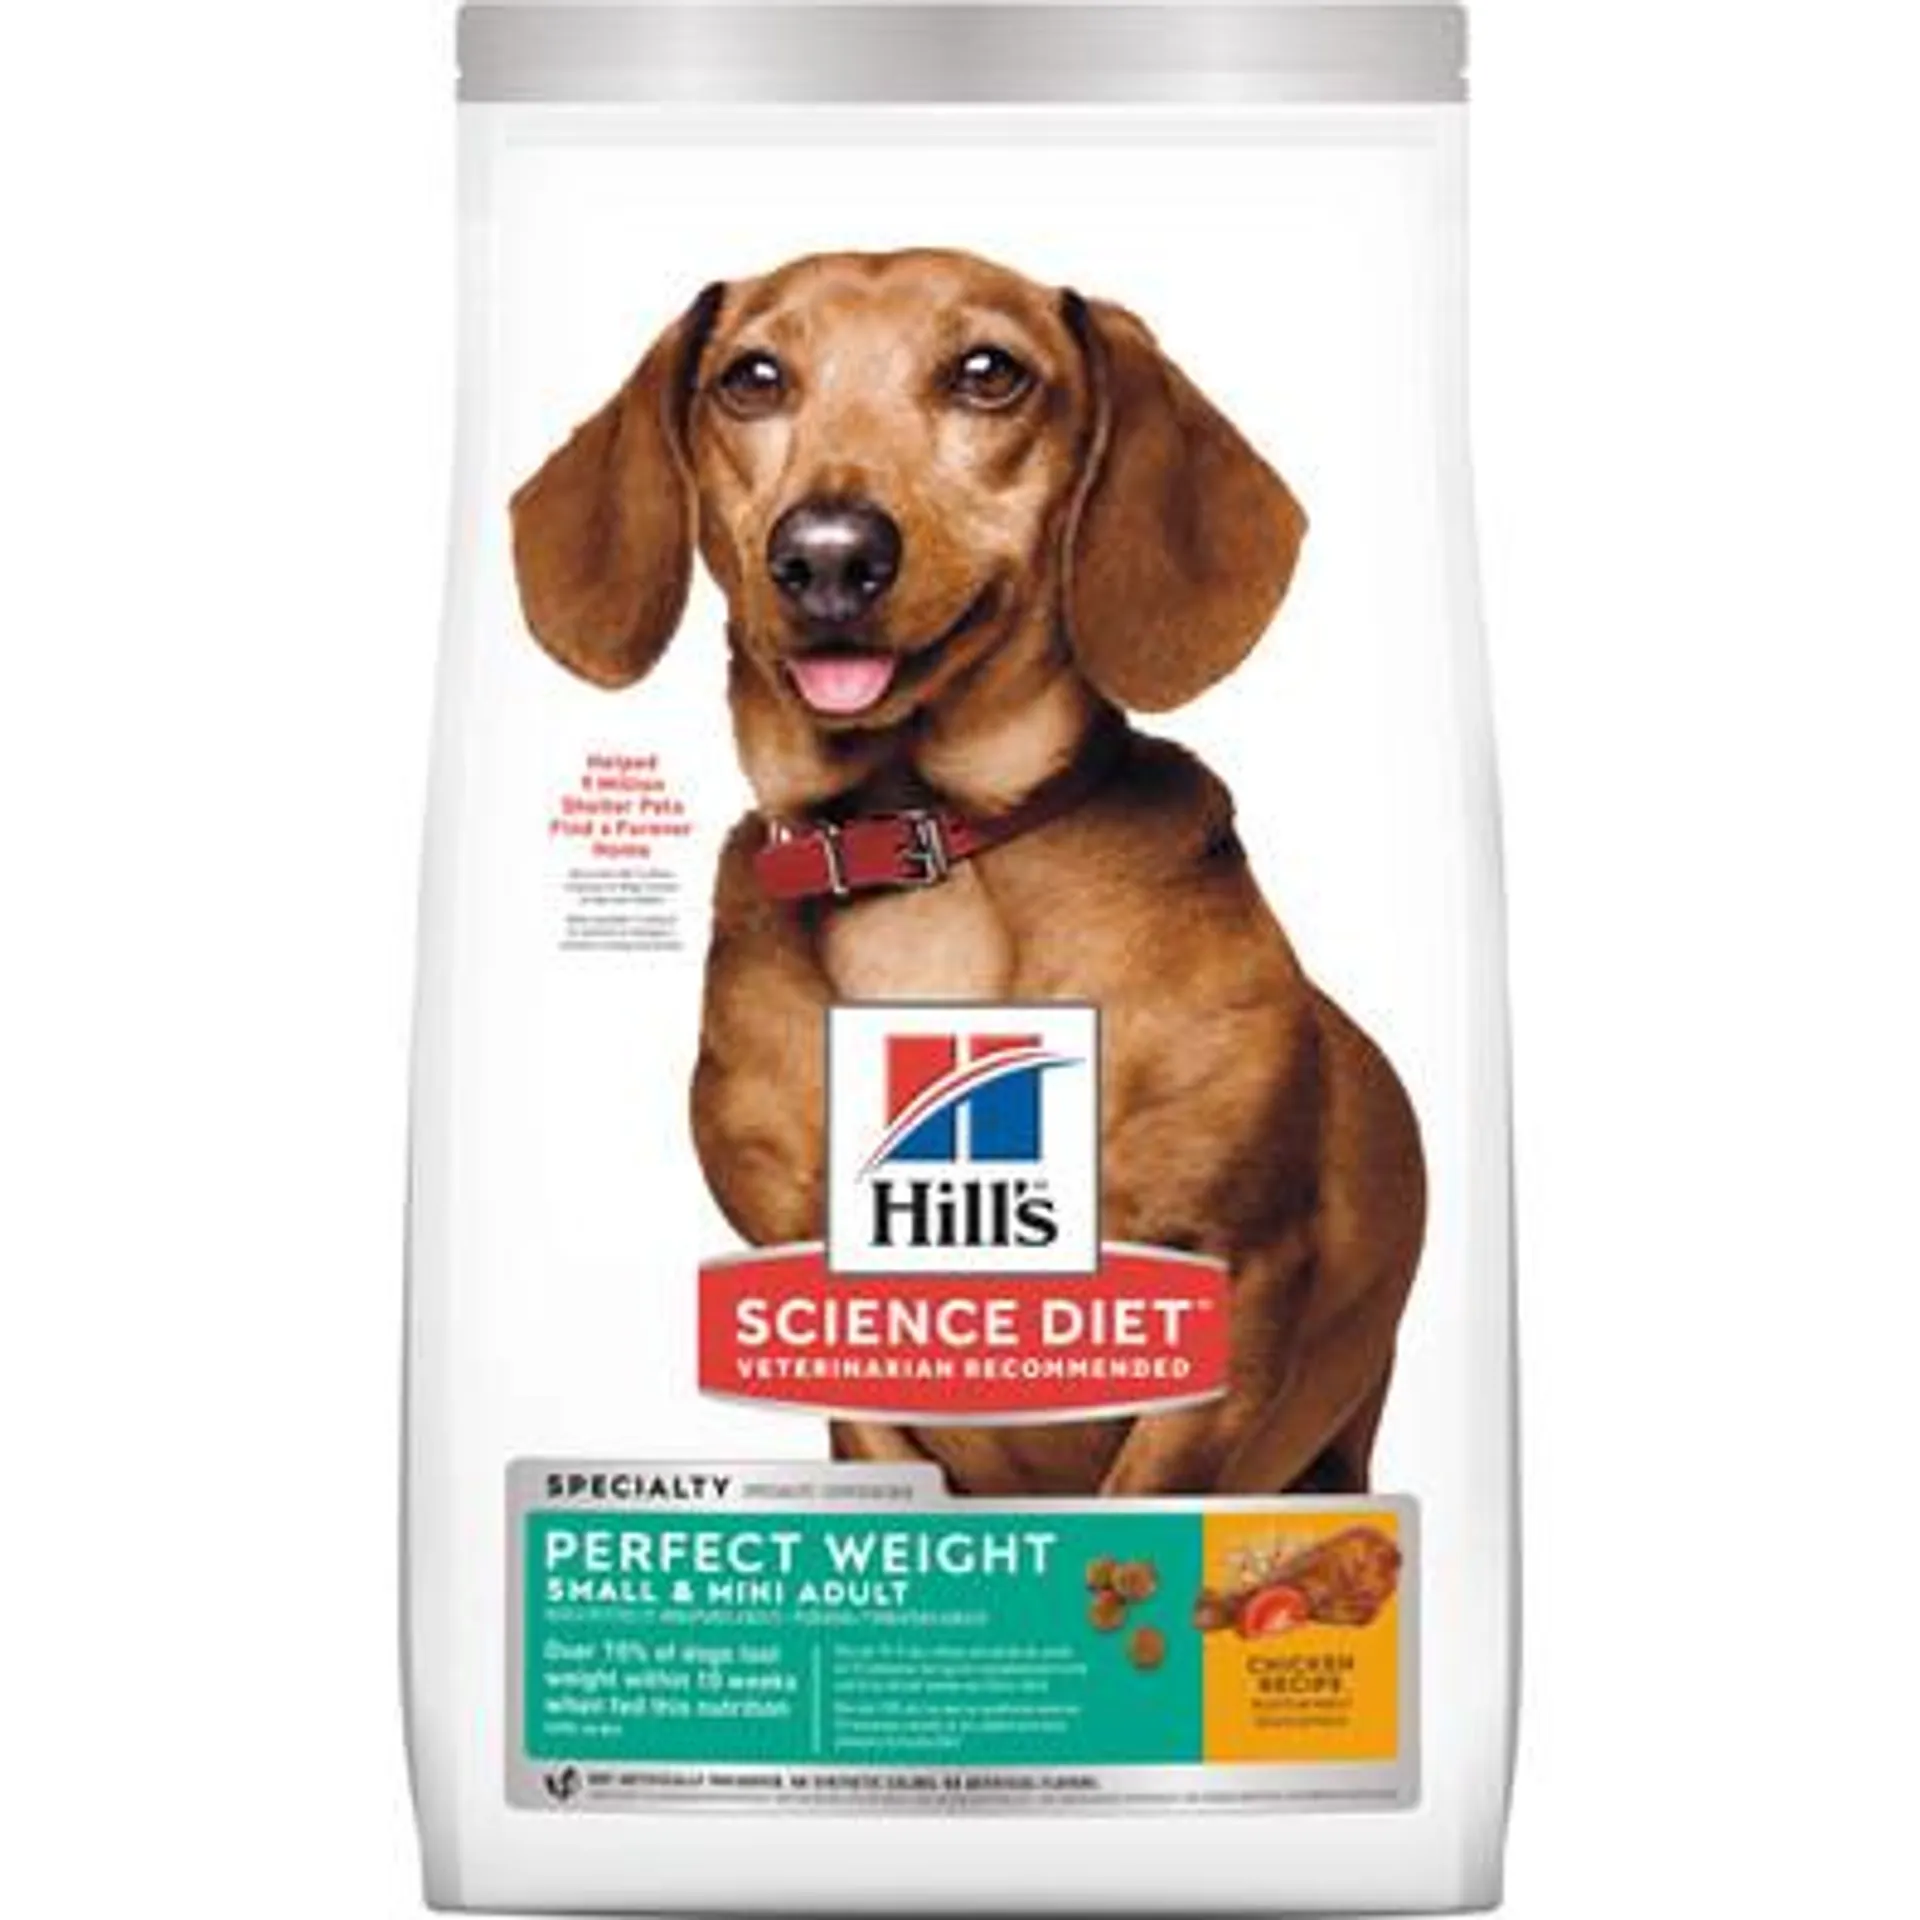 Hill's Science Diet Perfect Weight Small & Mini Adult Dry Dog Food